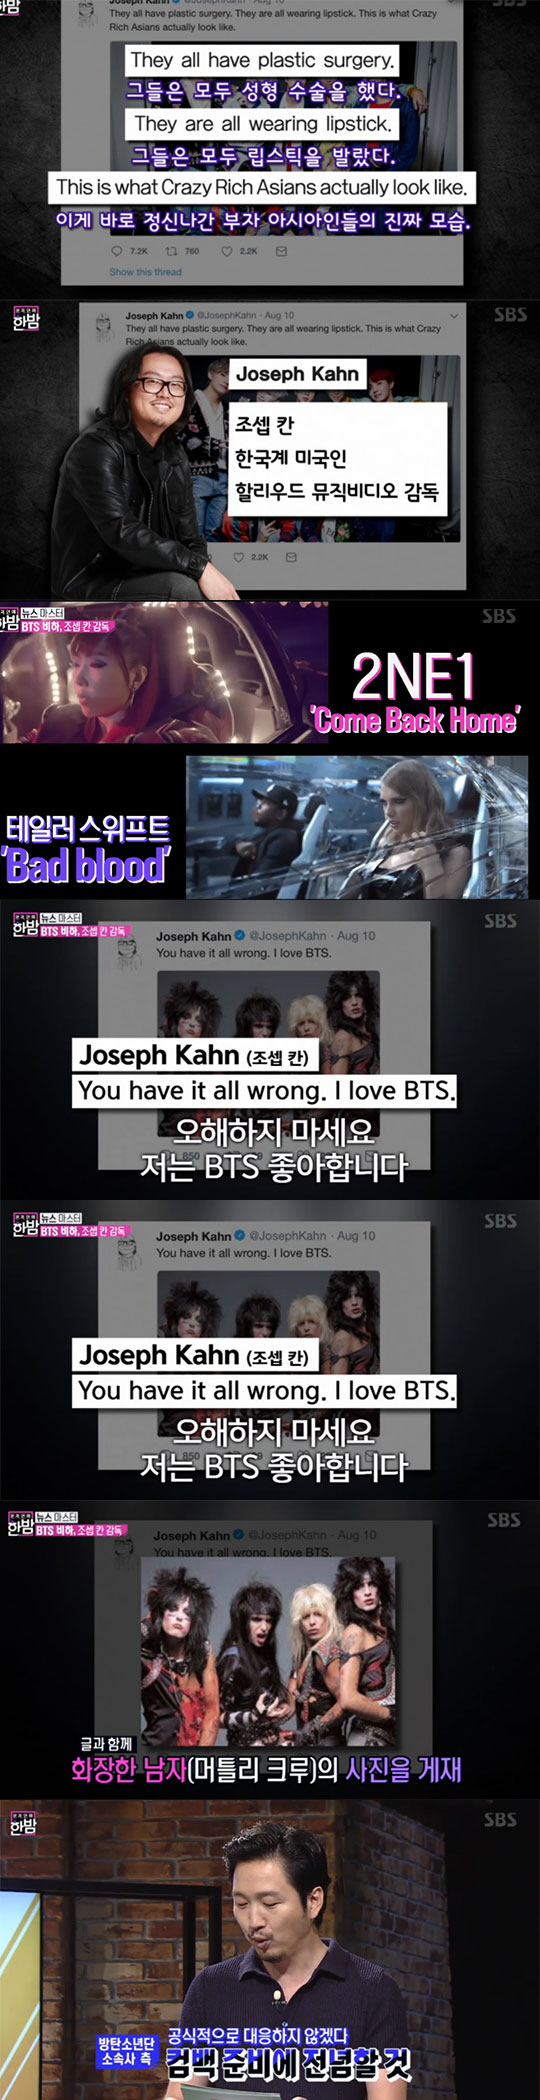 The controversy over the disparagement of BTS (BTS) by famous overseas MV directors was broadcast.On the 14th SBS Full Entertainment Night, famous MV director Joseph Khan said on his SNS about BTS, They all had plastic surgery and applied Lipstick.The real picture of the crazy Wealthy Asians, the news said.Joseph Khan said as the controversy over BTS disparagement grew, including being criticized like a storm, Dont misunderstand.I like that BTS, he said, but he did not reflect on the picture of Murtley Crew with makeup.Joseph Khan has been in controversy over plagiarizing two-aniwons comeback home movie at the time of Taylor Swifts Bad Blood movie.BTS, which is about to return to the repackage, said, I will not respond officially. I will concentrate on preparing for a comeback.